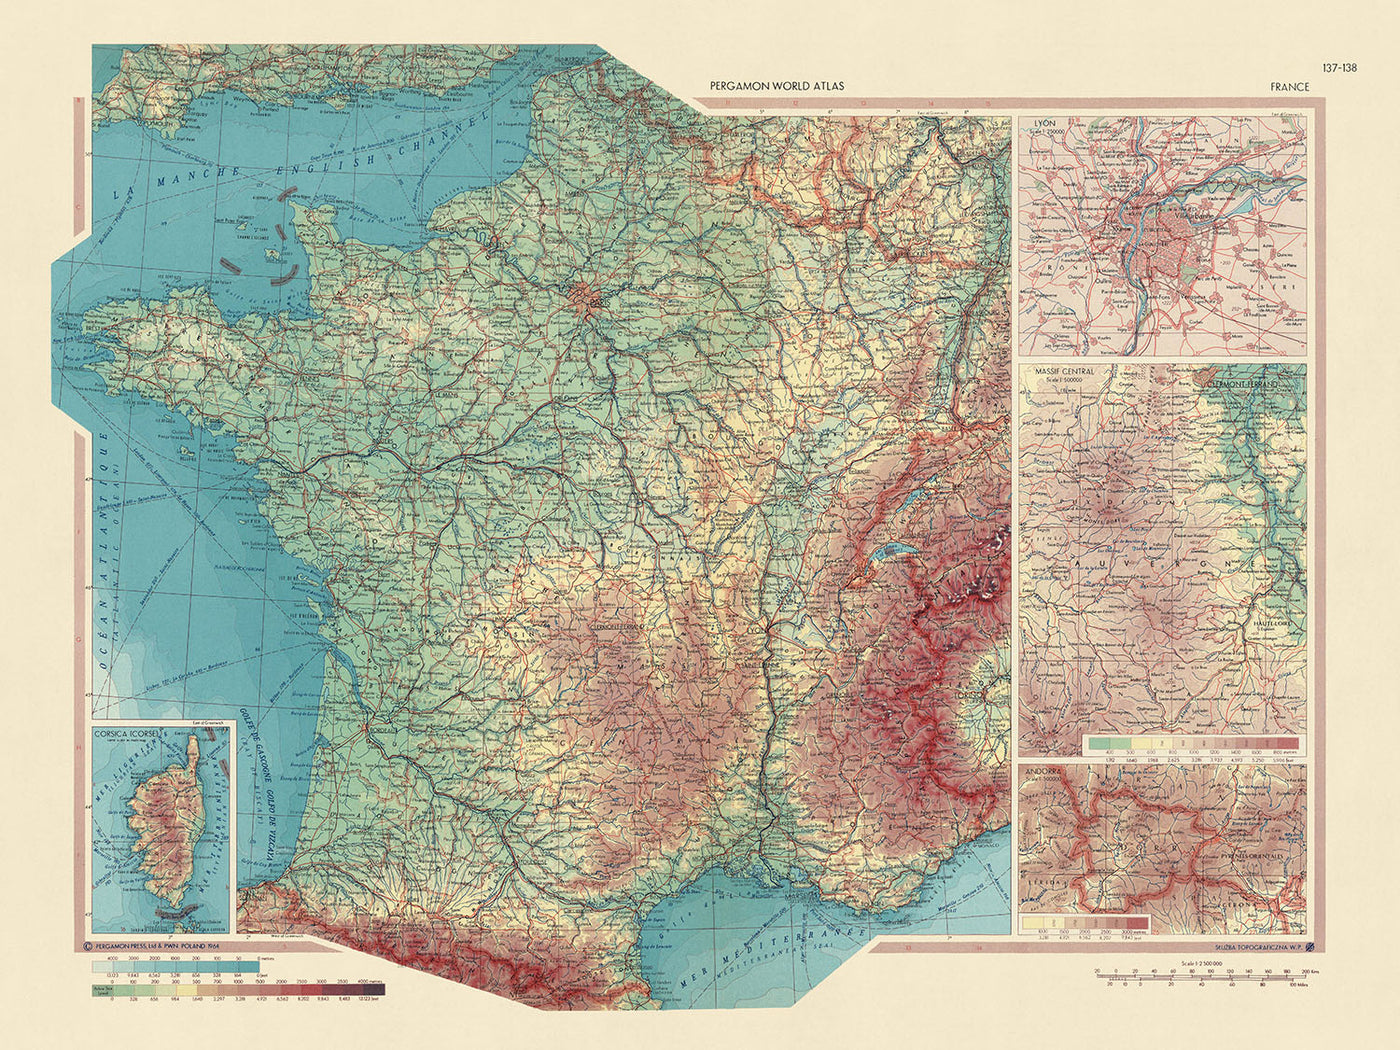 Old Map of France, 1967: Andorra, Massif Central, Lyon, Corsica, Detailed Political and Physical